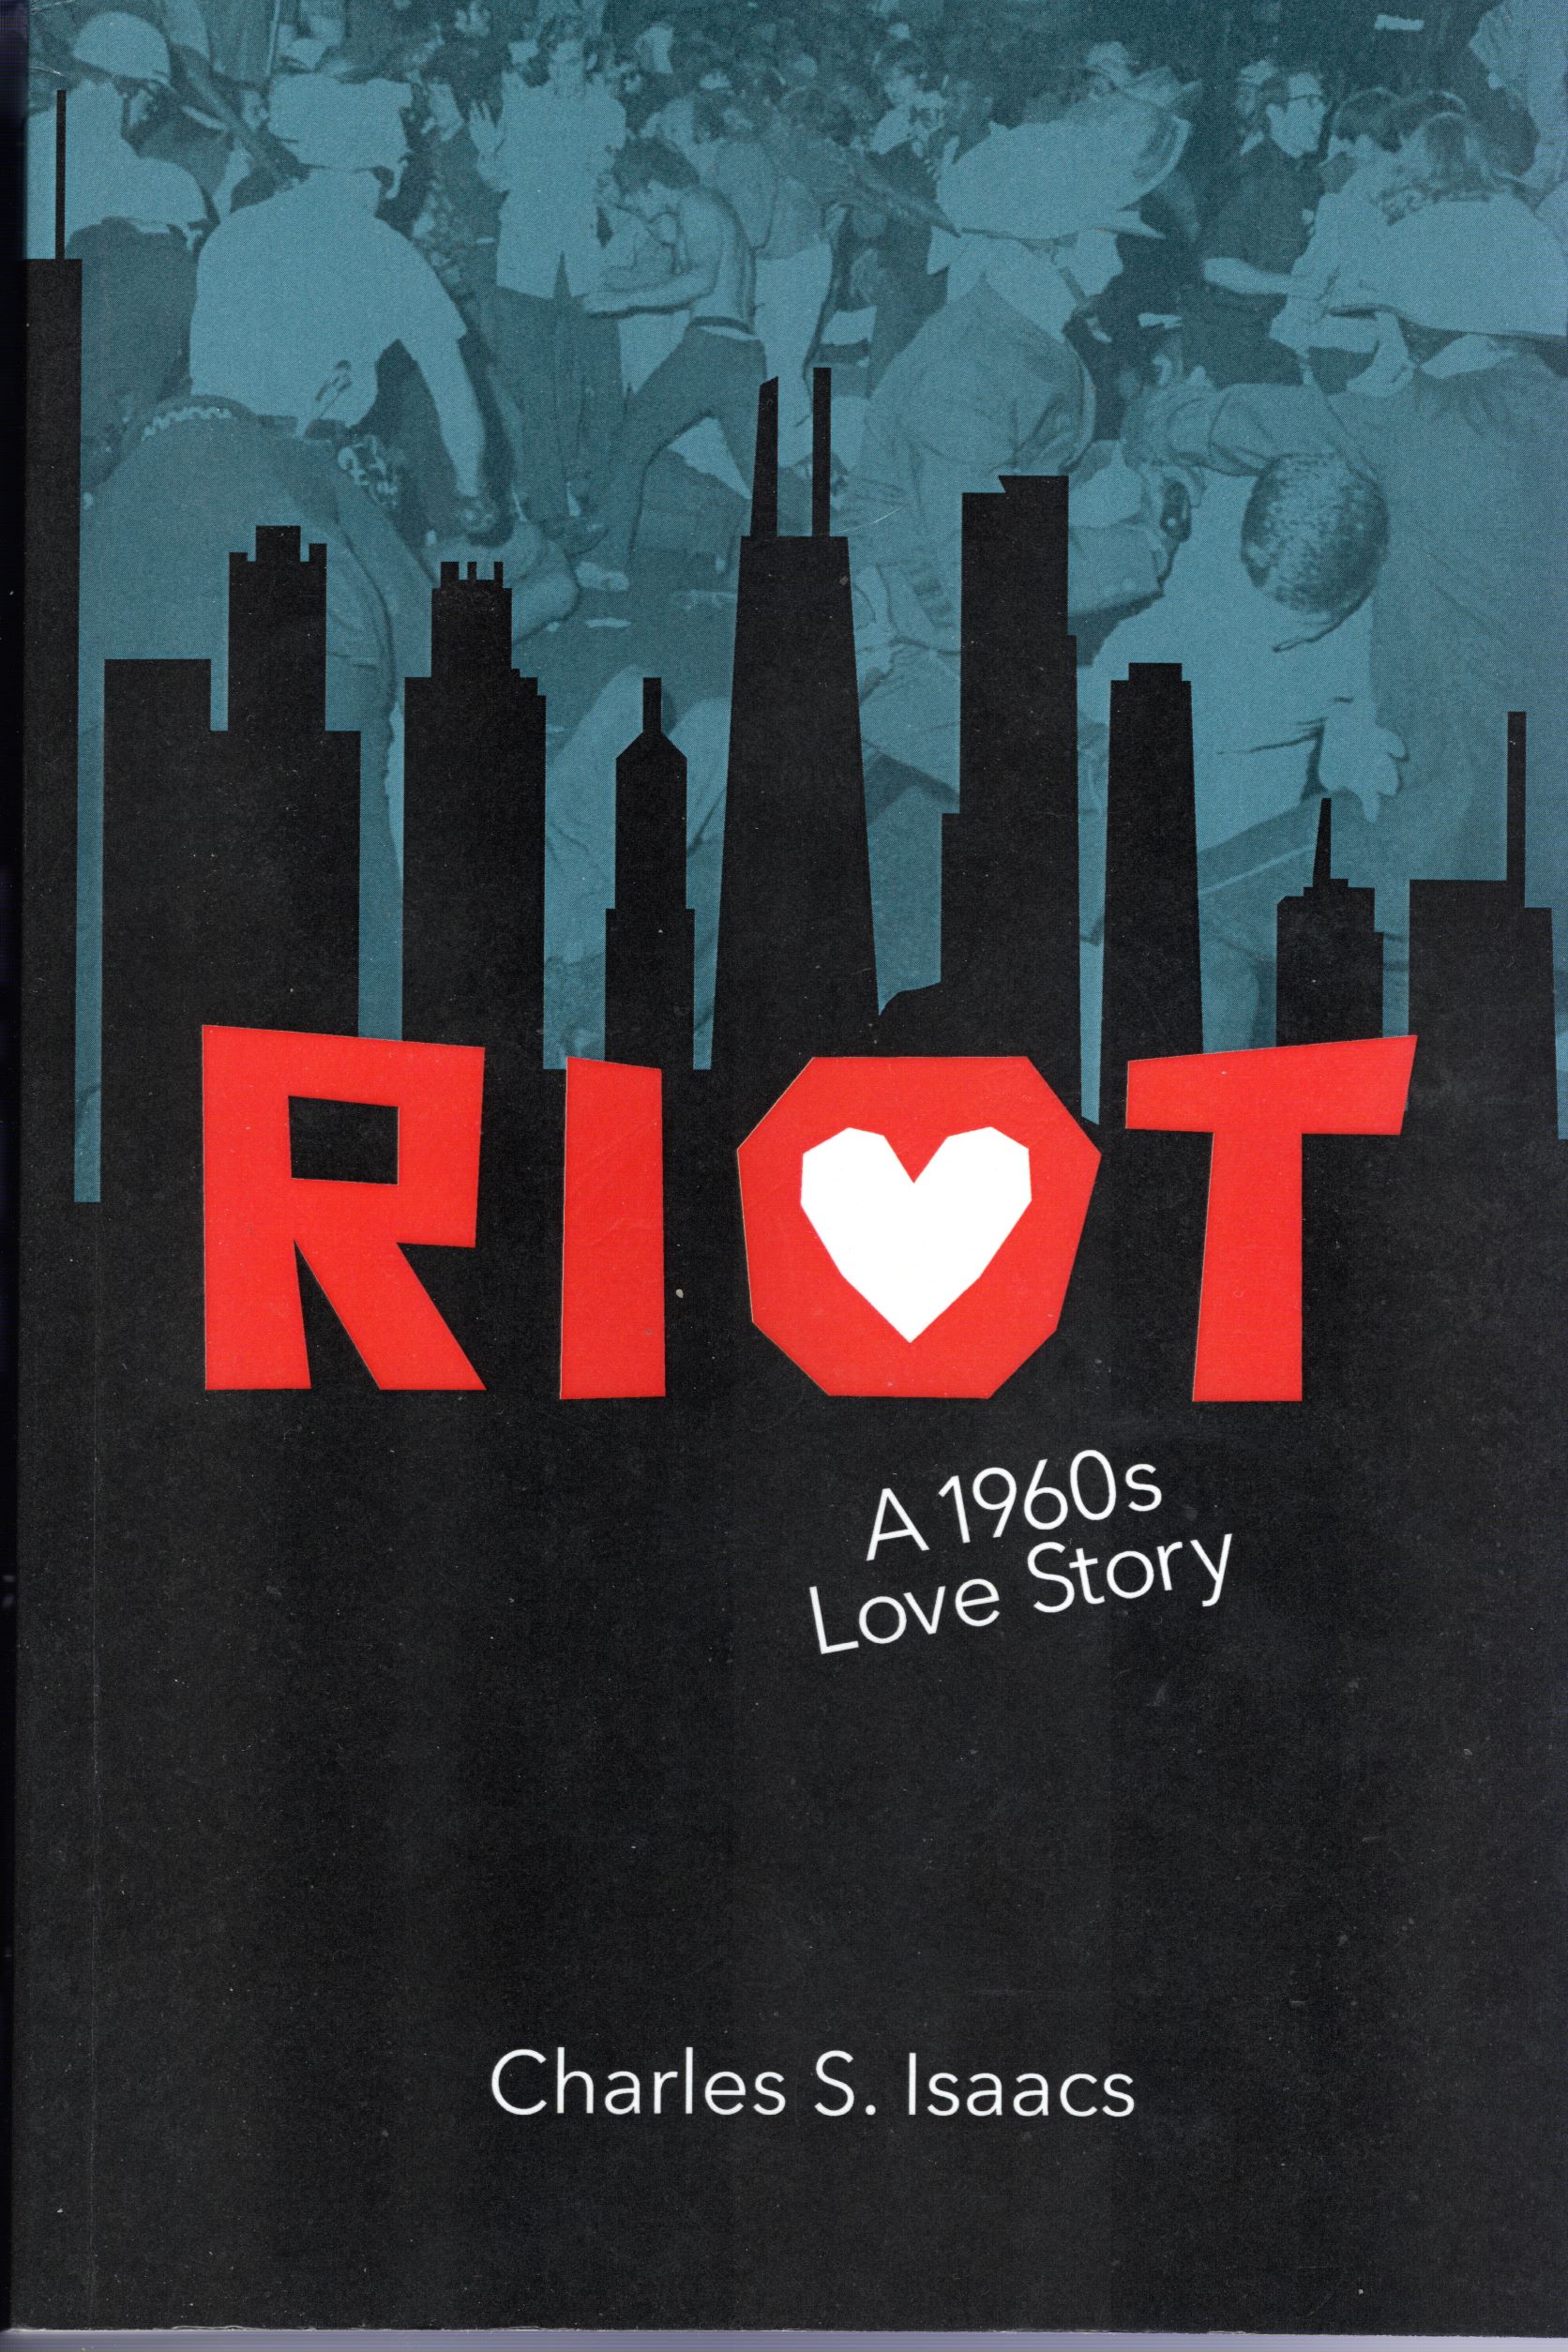 FREE: RIOT:  A 1960s Love Story by Charles S. Isaacs